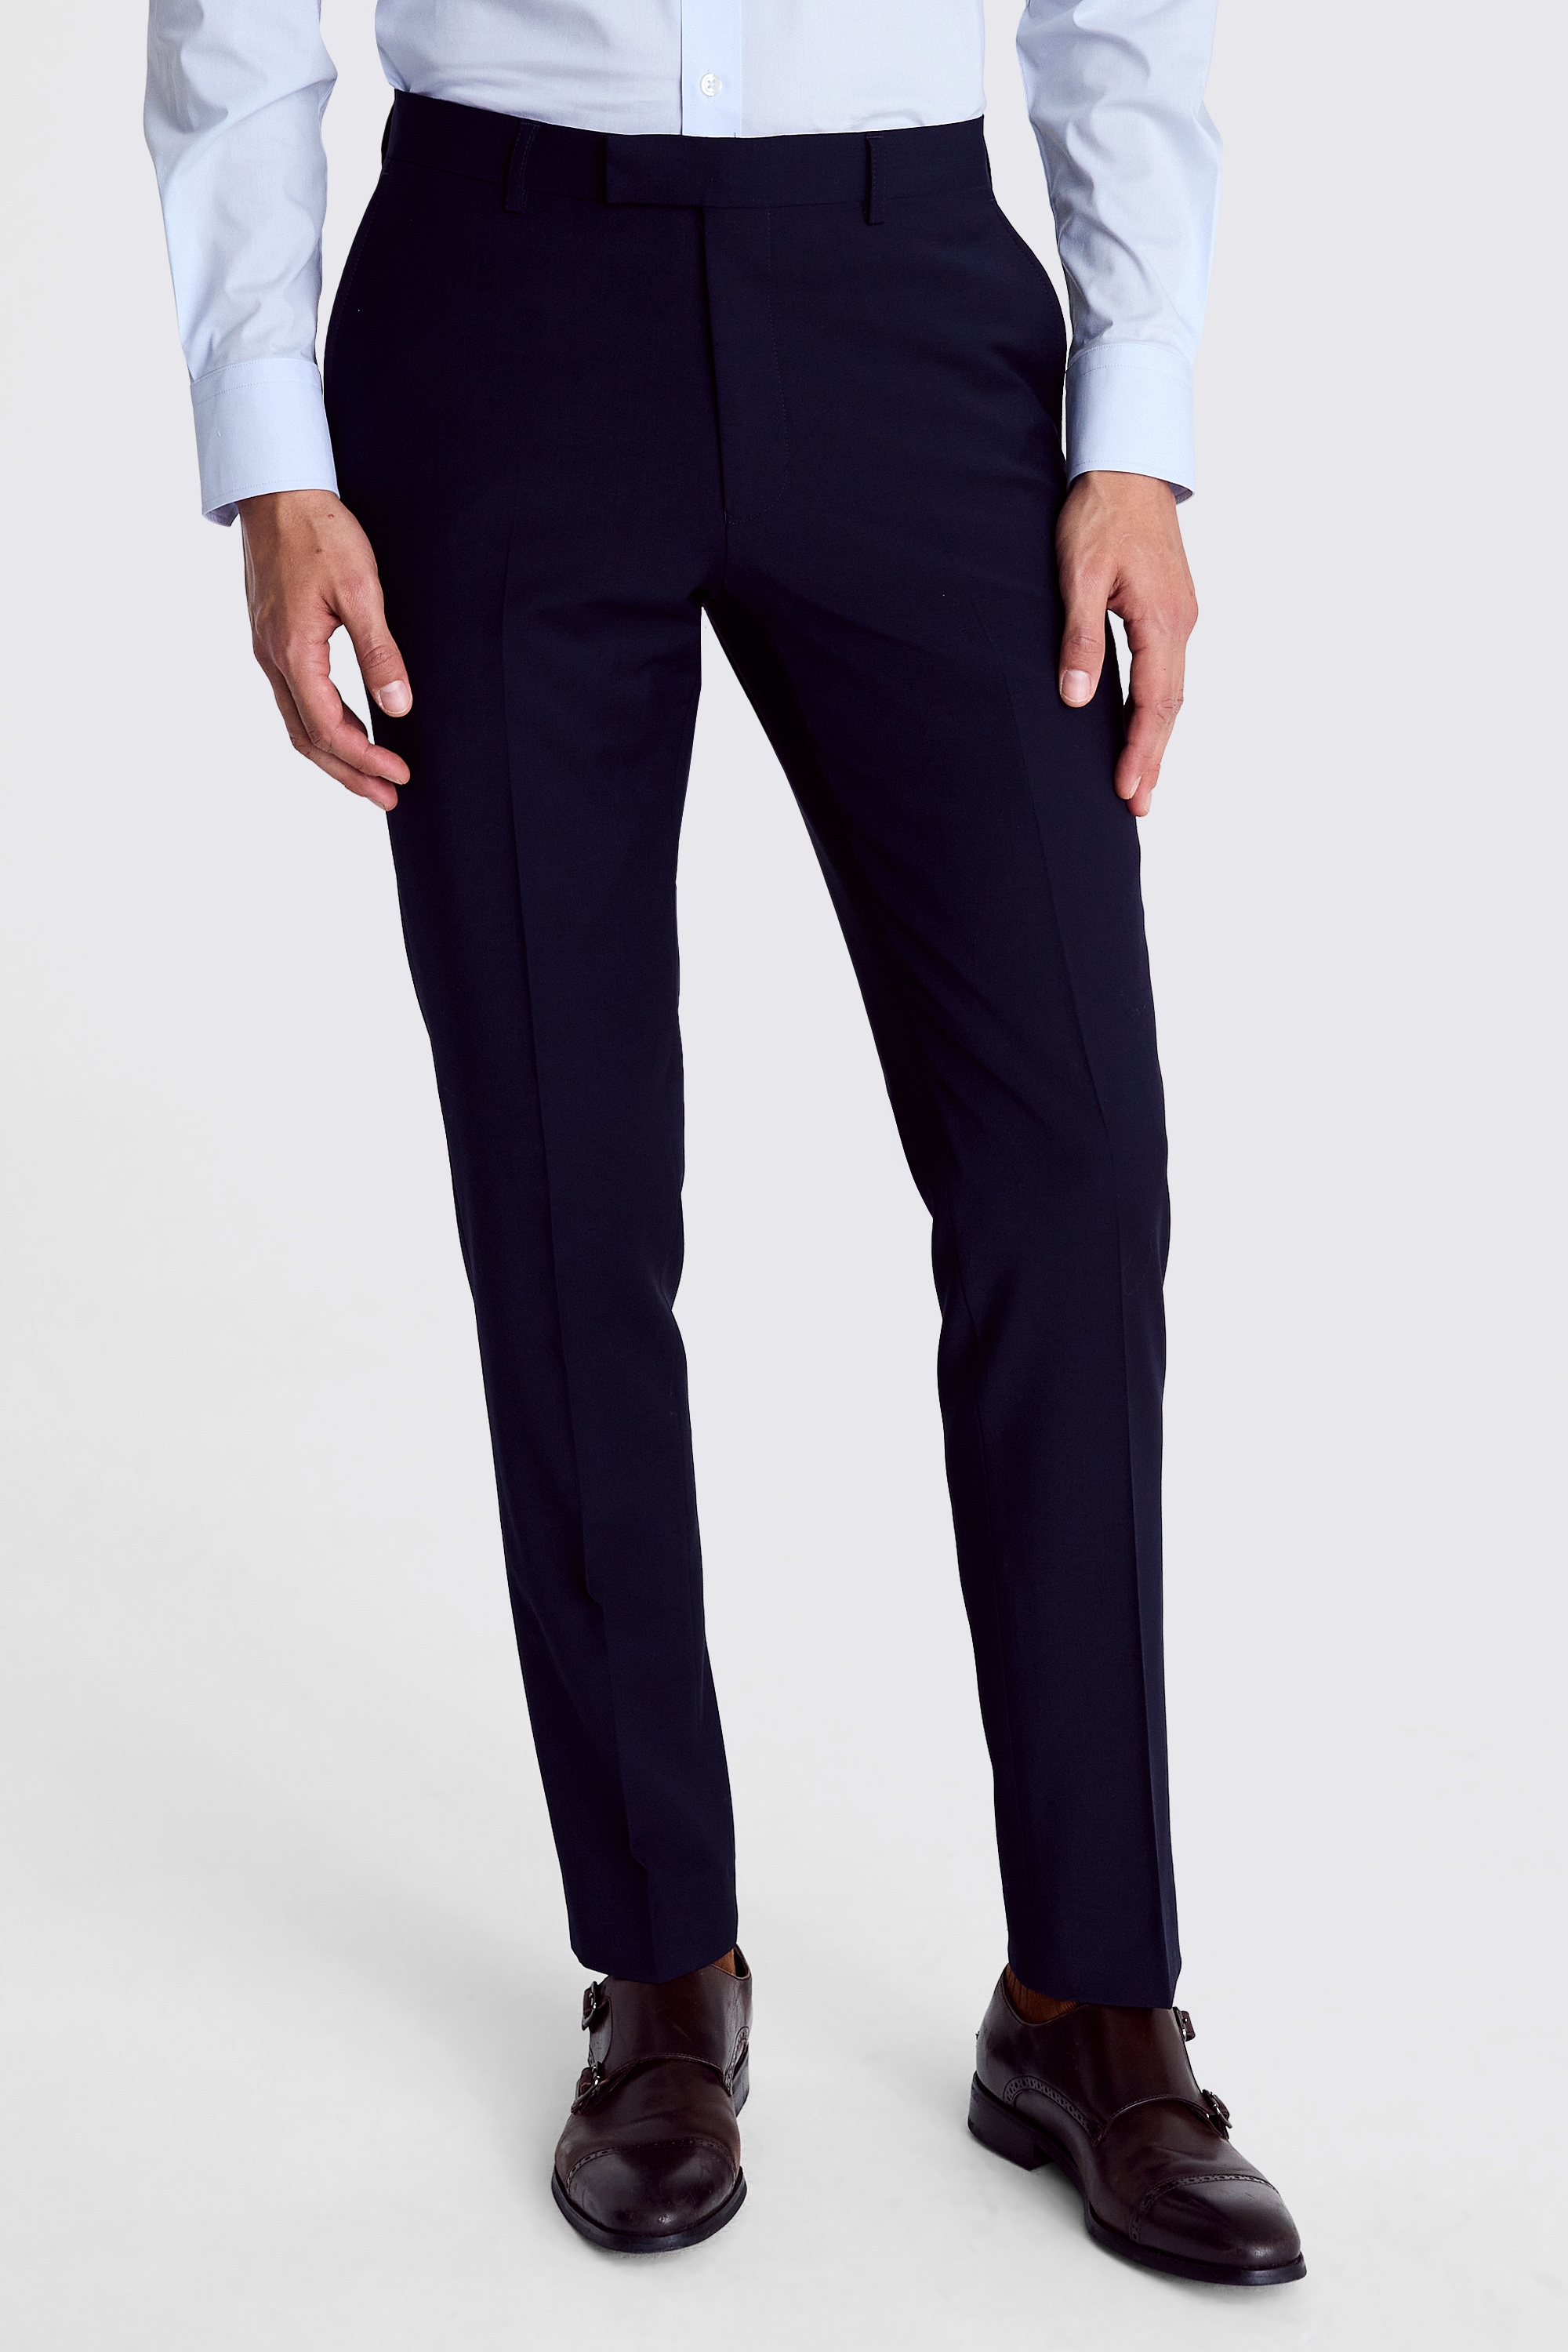 DKNY Slim Fit Ink Trousers | Buy Online at Moss